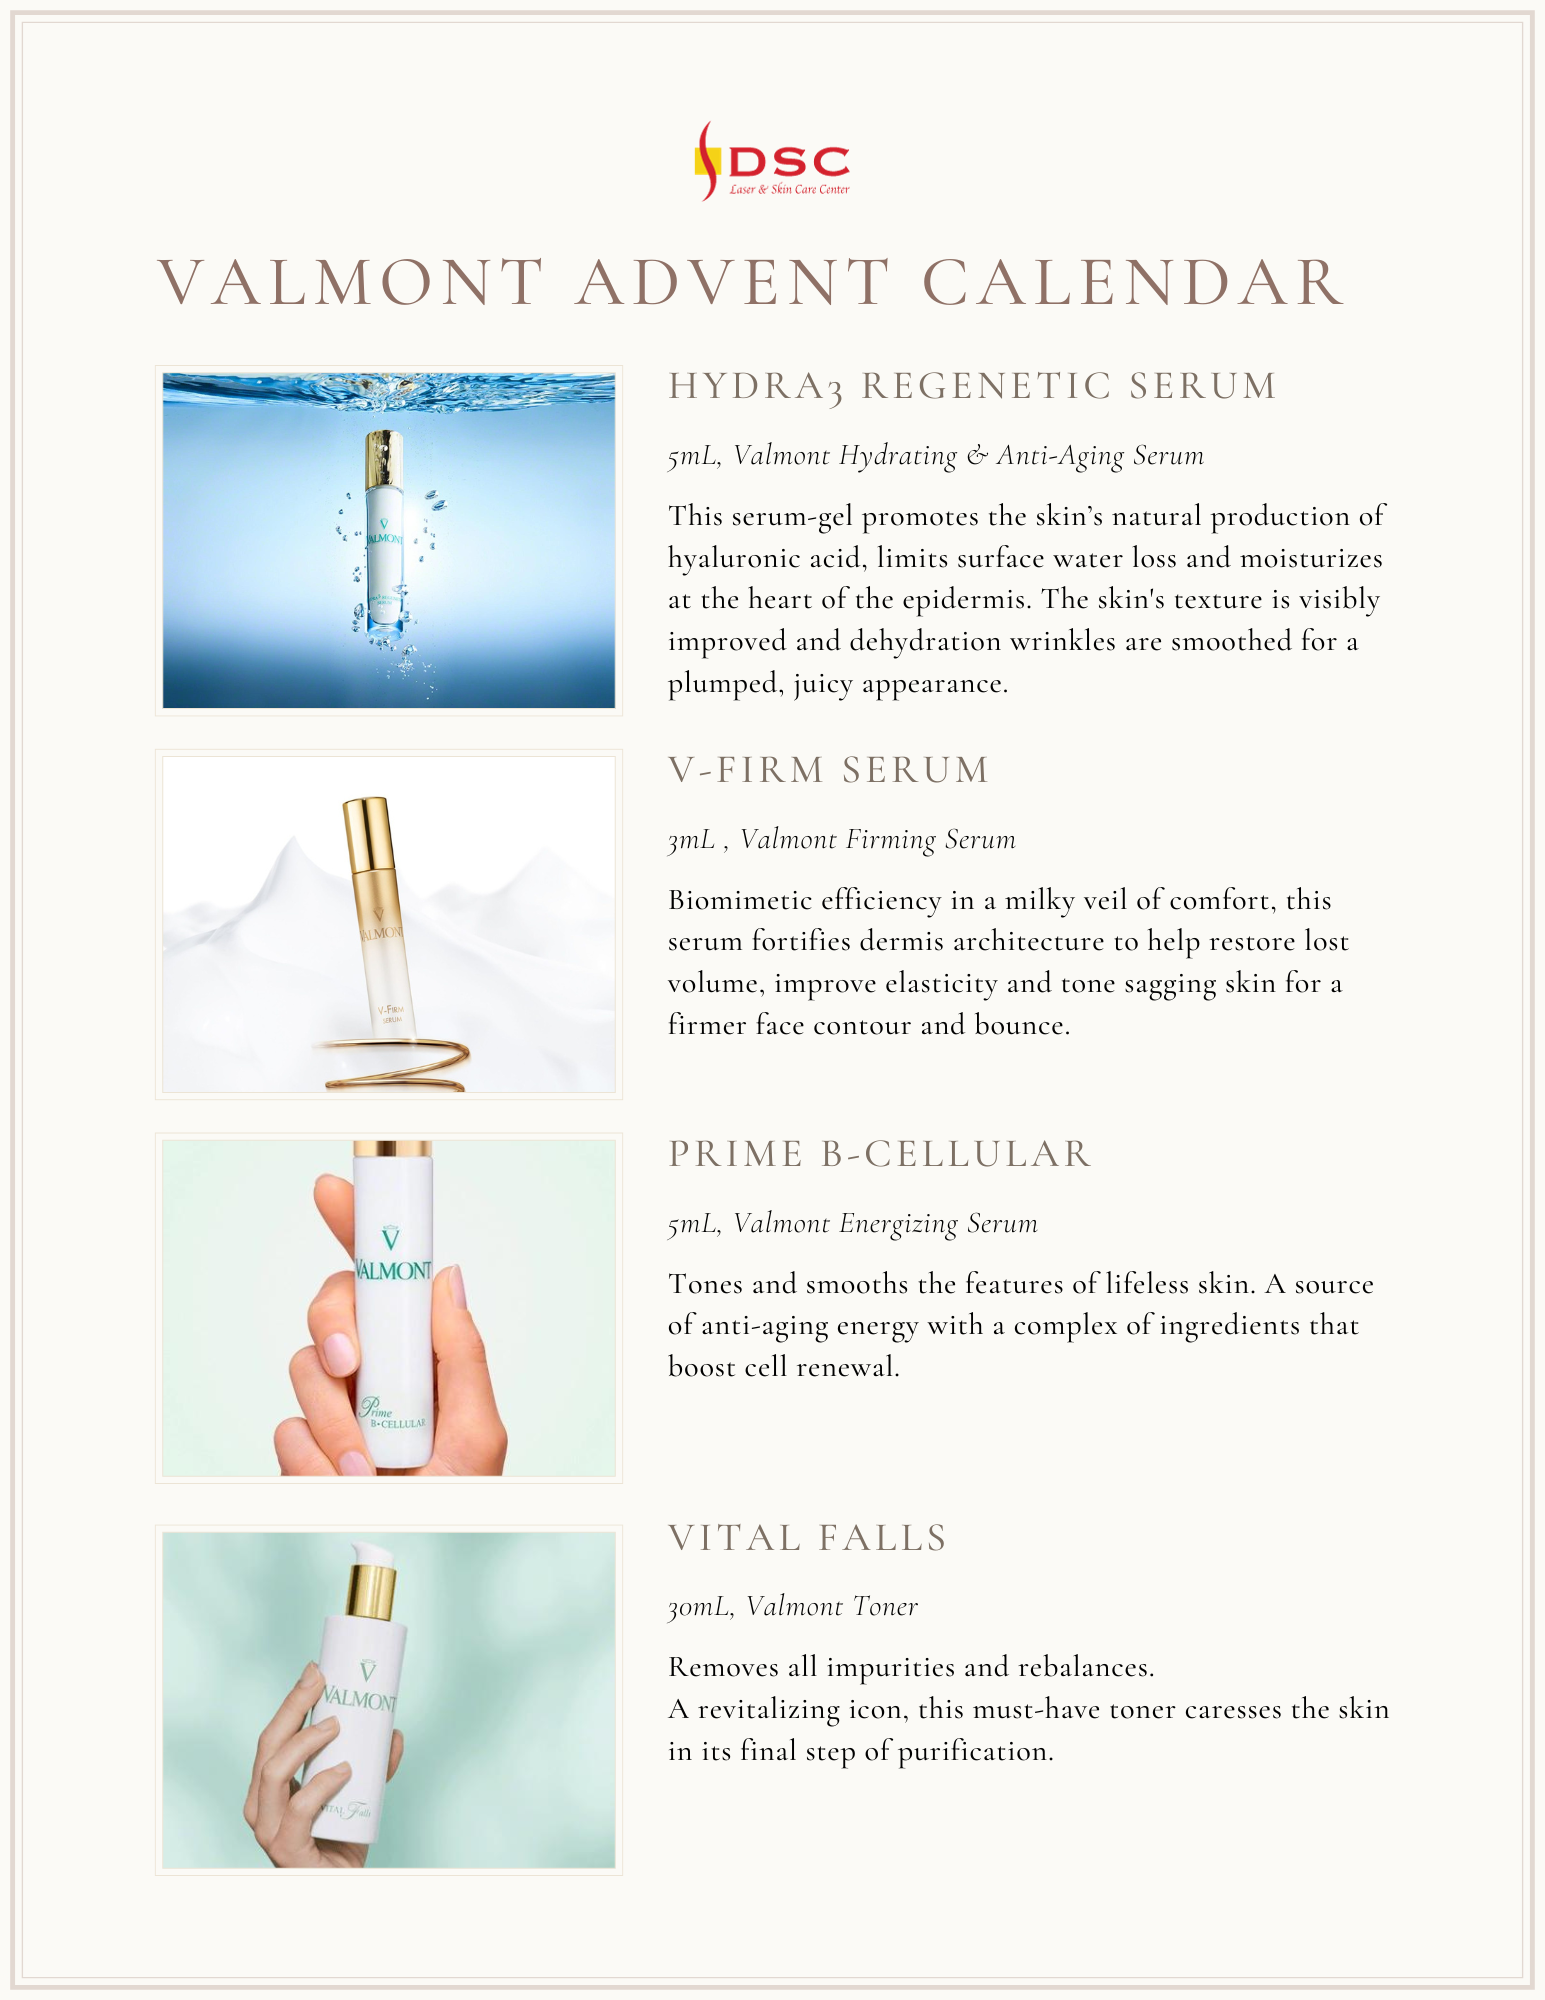 DSC Valmont 2023 Advent Calendar contents, page 2 of 3 with fifth through eighth skincare items included from top to bottom: Valmont Hydra3 Regenetic Serum, Valmont V-Firm Serum, Valmont Prime B Cellular Serum, and Valmont Vital Falls toner